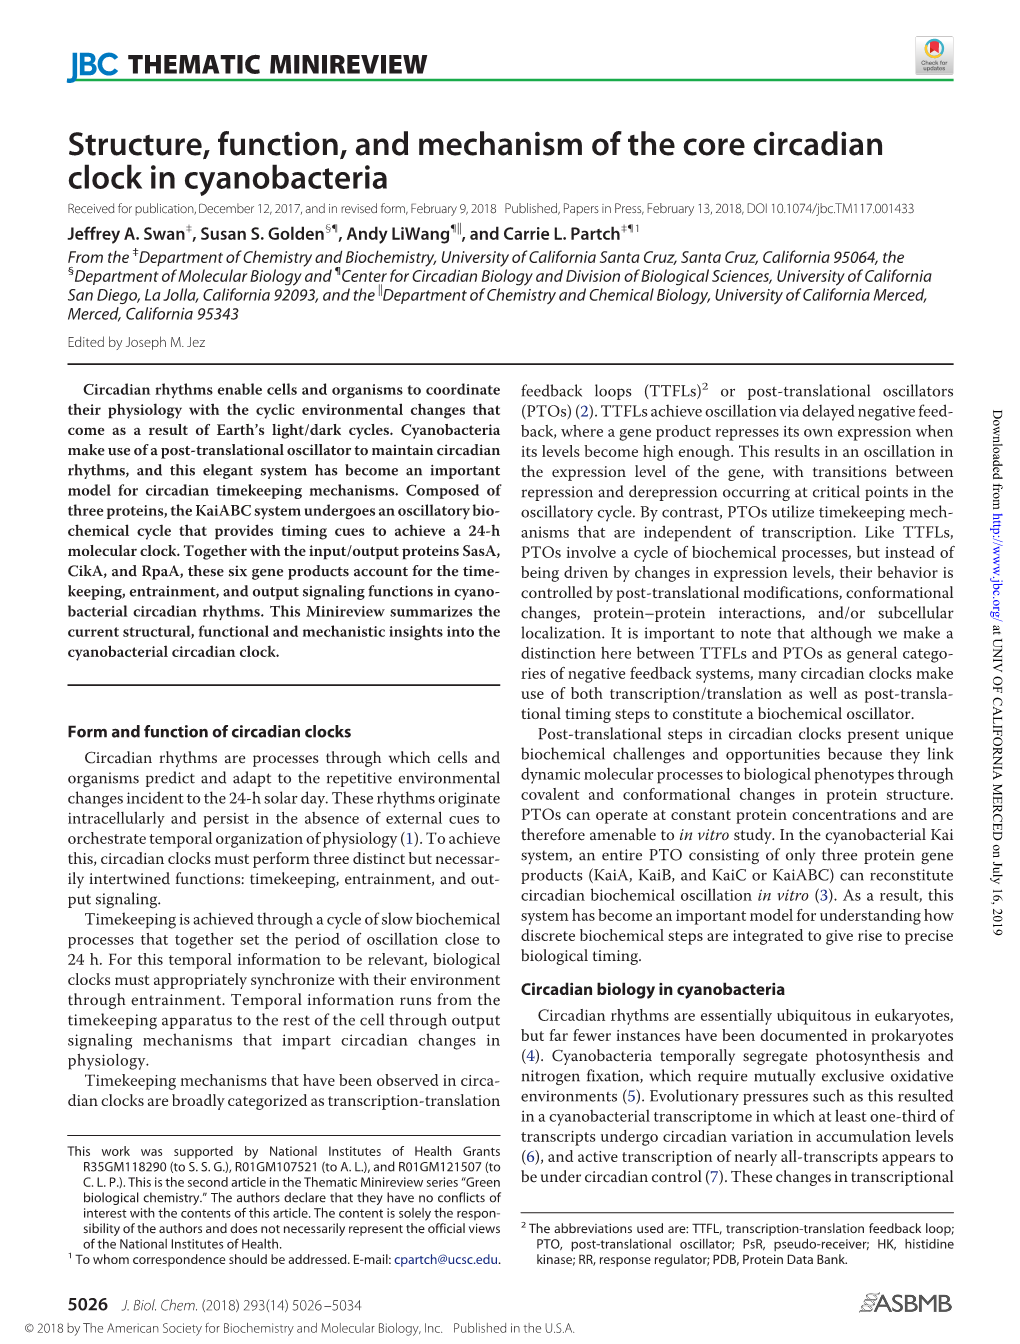 Structure, Function, and Mechanism of the Core Circadian Clock In